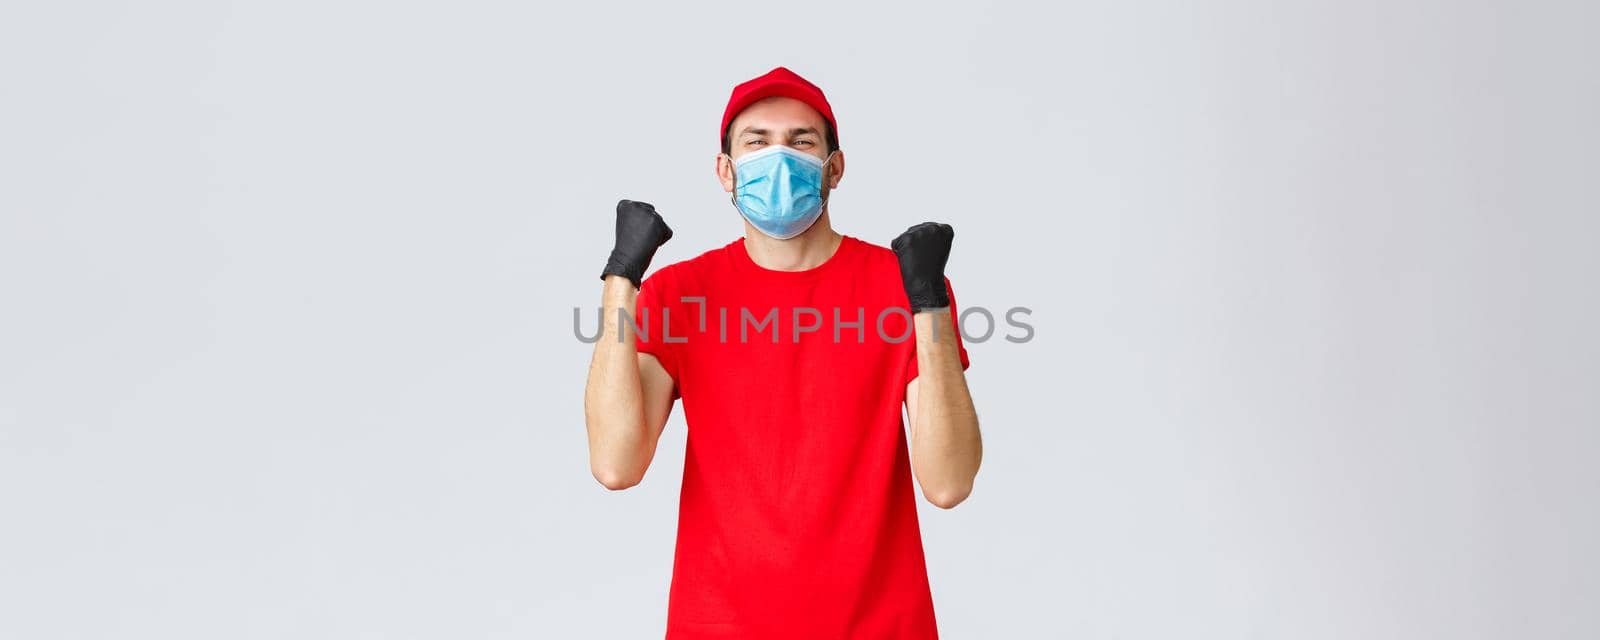 Covid-19, self-quarantine, online shopping and shipping concept. Excited, happy courier in red uniform, medical face mask, fist pump in rejoice. Delivery guy celebrating success, achieve goal.